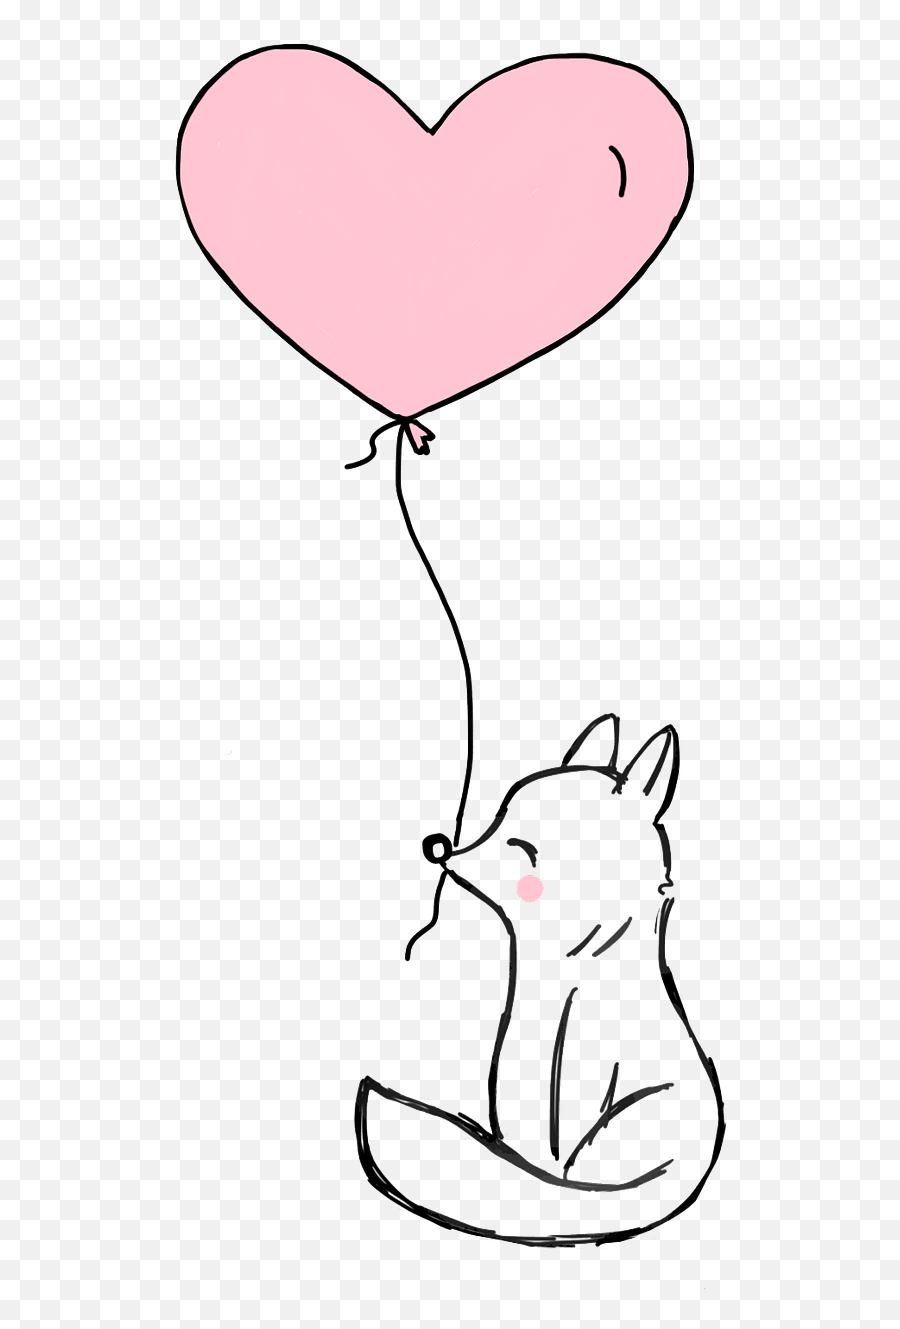 Fox With Heart Balloon Clipart Free Download Transparent - Fox Holding Heart Balloon Emoji,Balloon Clipart Black And White